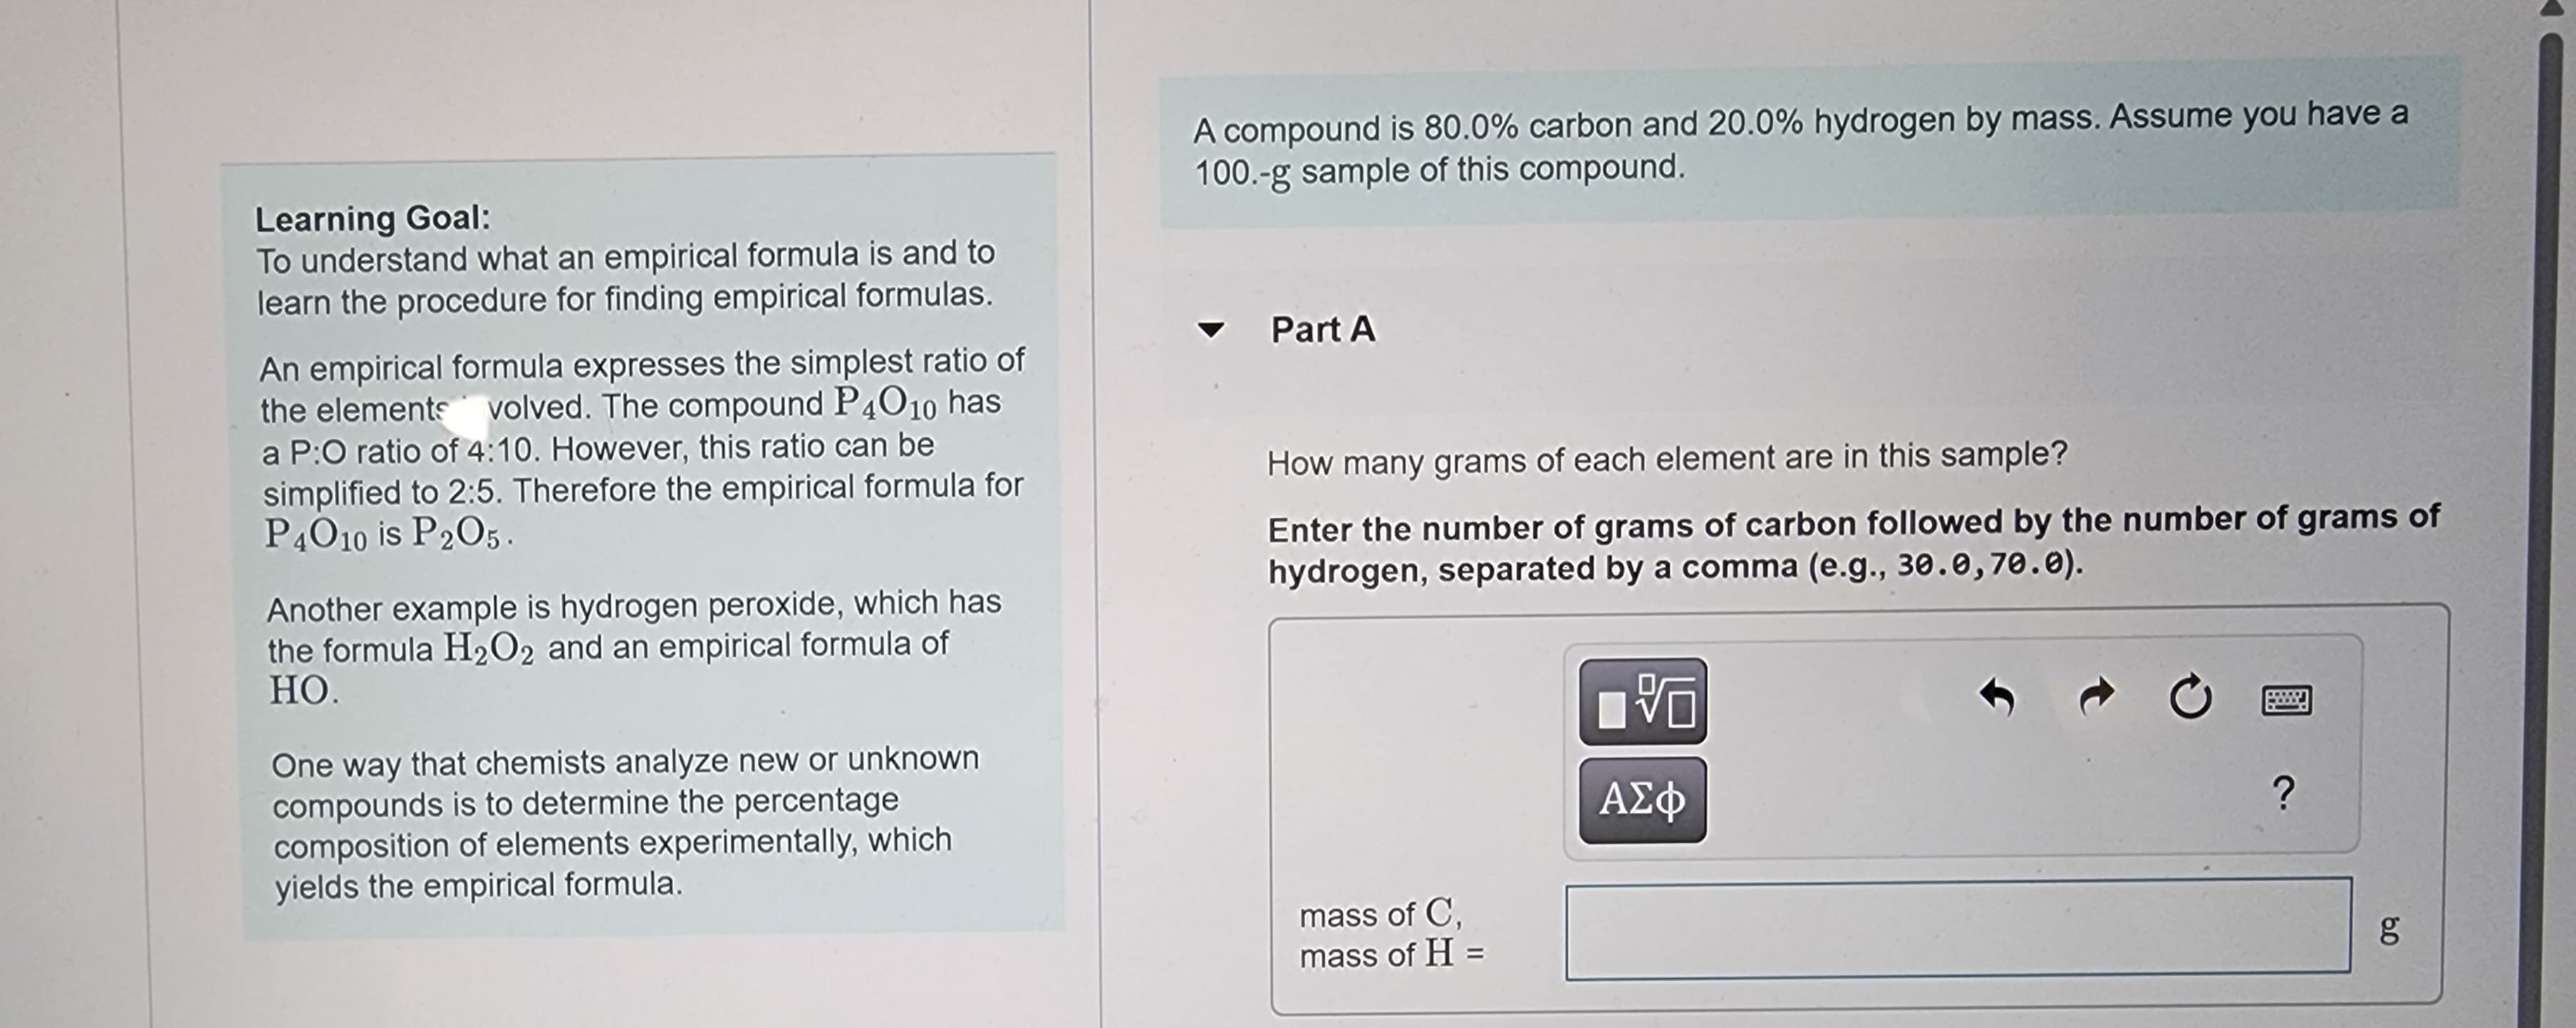 Learning Goal:
To understand what an empirical formula is and to
learn the procedure for finding empirical formulas.
An empirical formula expresses the simplest ratio of
the elements volved. The compound P4010 has
a P:O ratio of 4:10. However, this ratio can be
simplified to 2:5. Therefore the empirical formula for
P4010 is P2O5.
Another example is hydrogen peroxide, which has
the formula H₂O2 and an empirical formula of
HO.
One way that chemists analyze new or unknown
compounds is to determine the percentage
composition of elements experimentally, which
yields the empirical formula.
A compound is 80.0% carbon and 20.0% hydrogen by mass. Assume you have a
100.-g sample of this compound.
Part A
How many grams of each element are in this sample?
Enter the number of grams of carbon followed by the number of grams of
hydrogen, separated by a comma (e.g., 30.0,70.0).
mass of C,
mass of H =
VO
ΑΣΦ
C
?
8.0
g